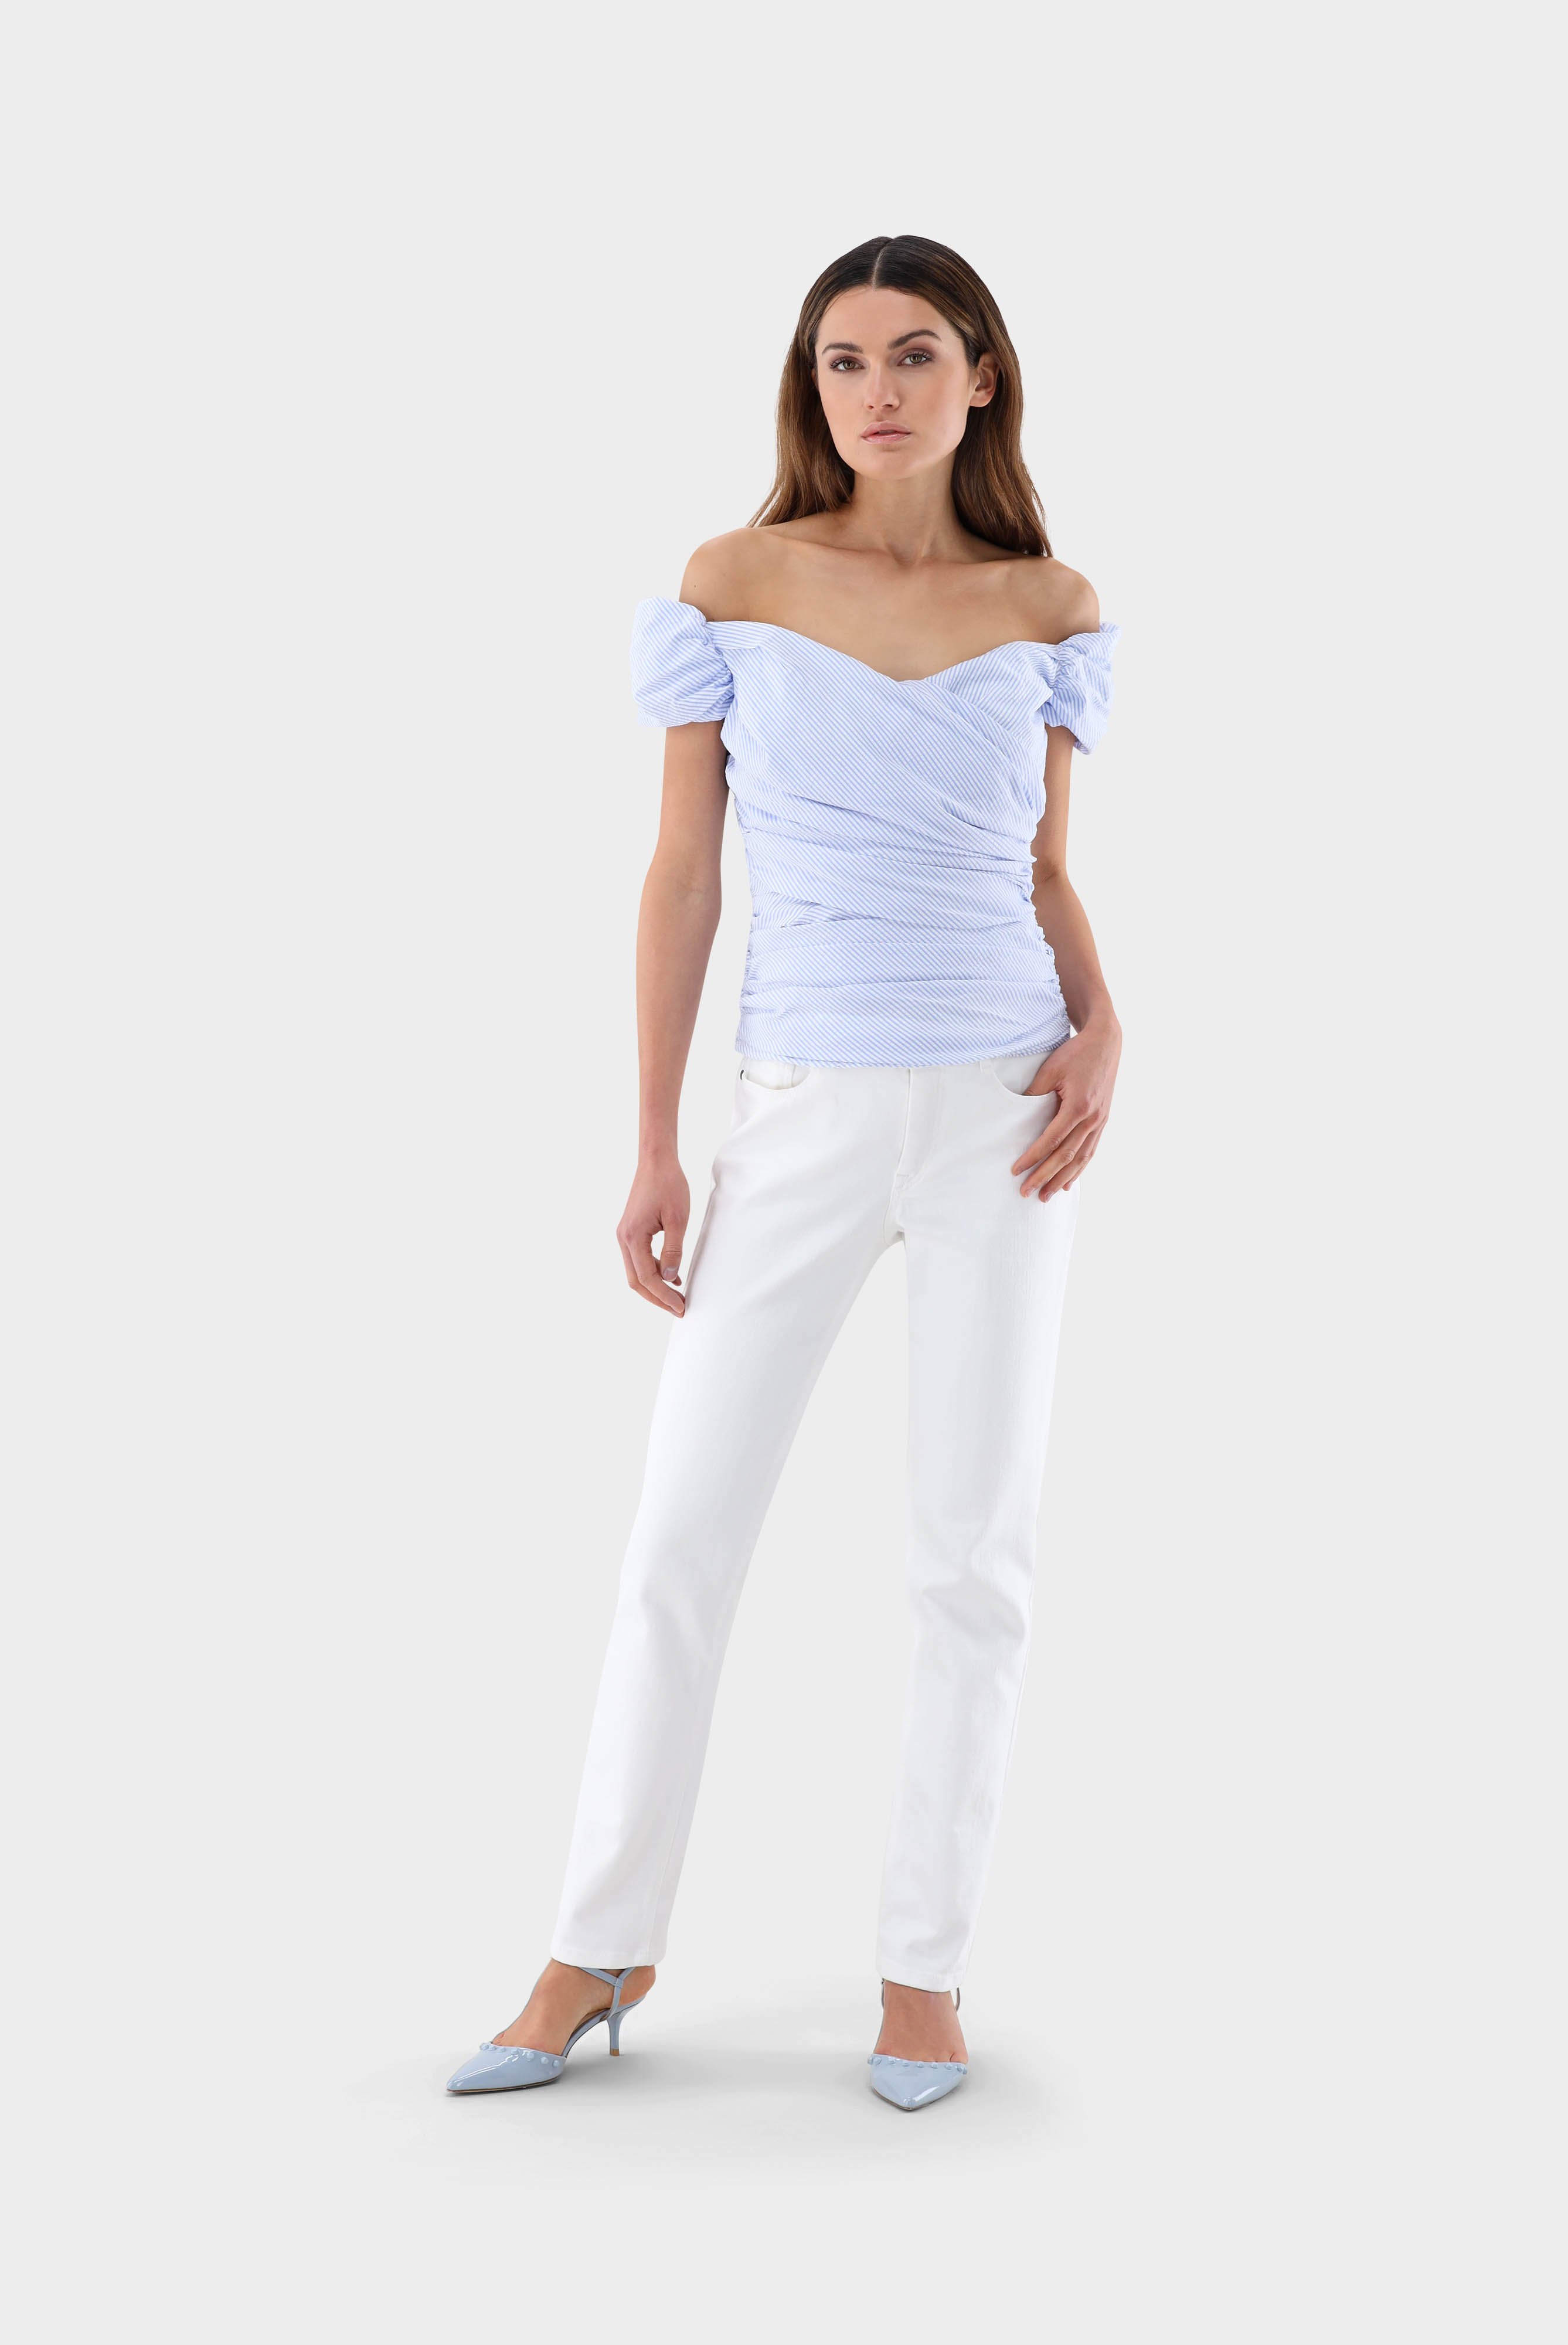 Casual Blouses+Bodice with Stripe Pattern+05.5288.18.151054.720.32